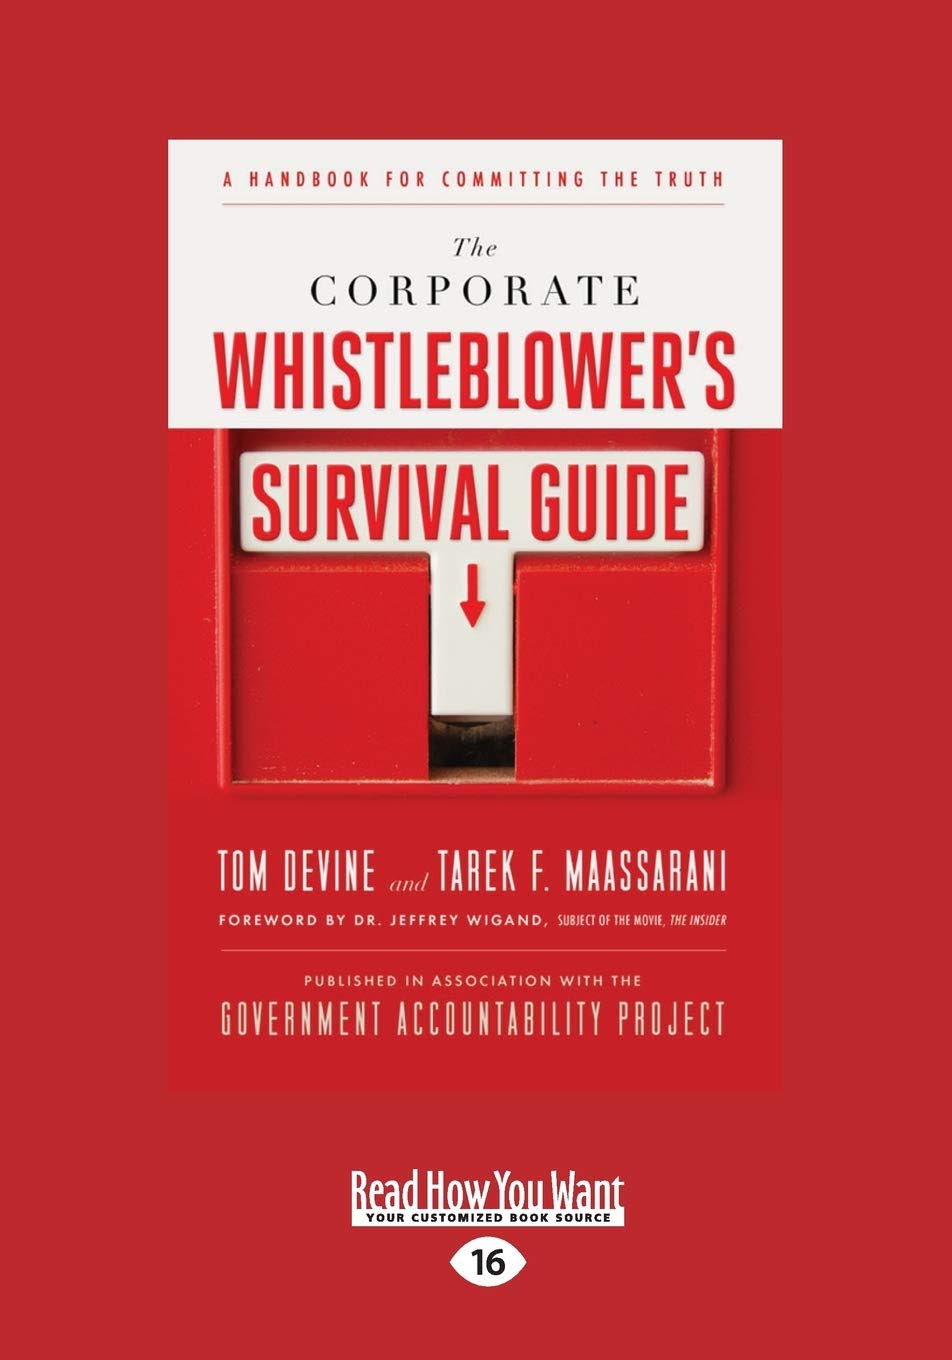 The Corporate Whistleblower's Survival Guide: A Handbook for Committing the Truth